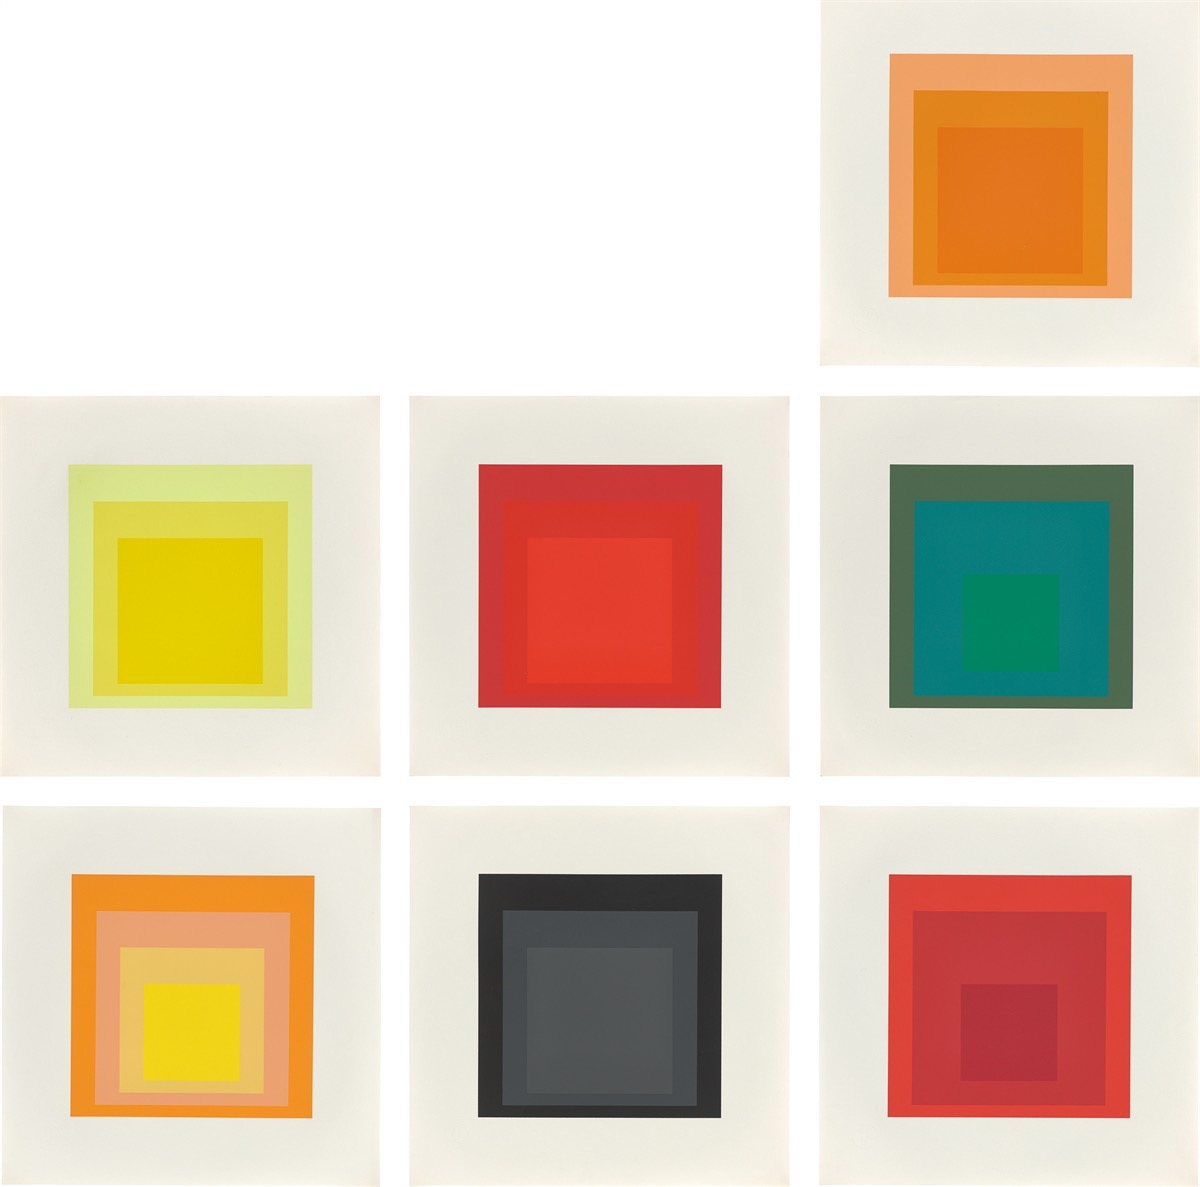 Josef Albers. ”Homage to the Square: Edition Keller I”. 1970